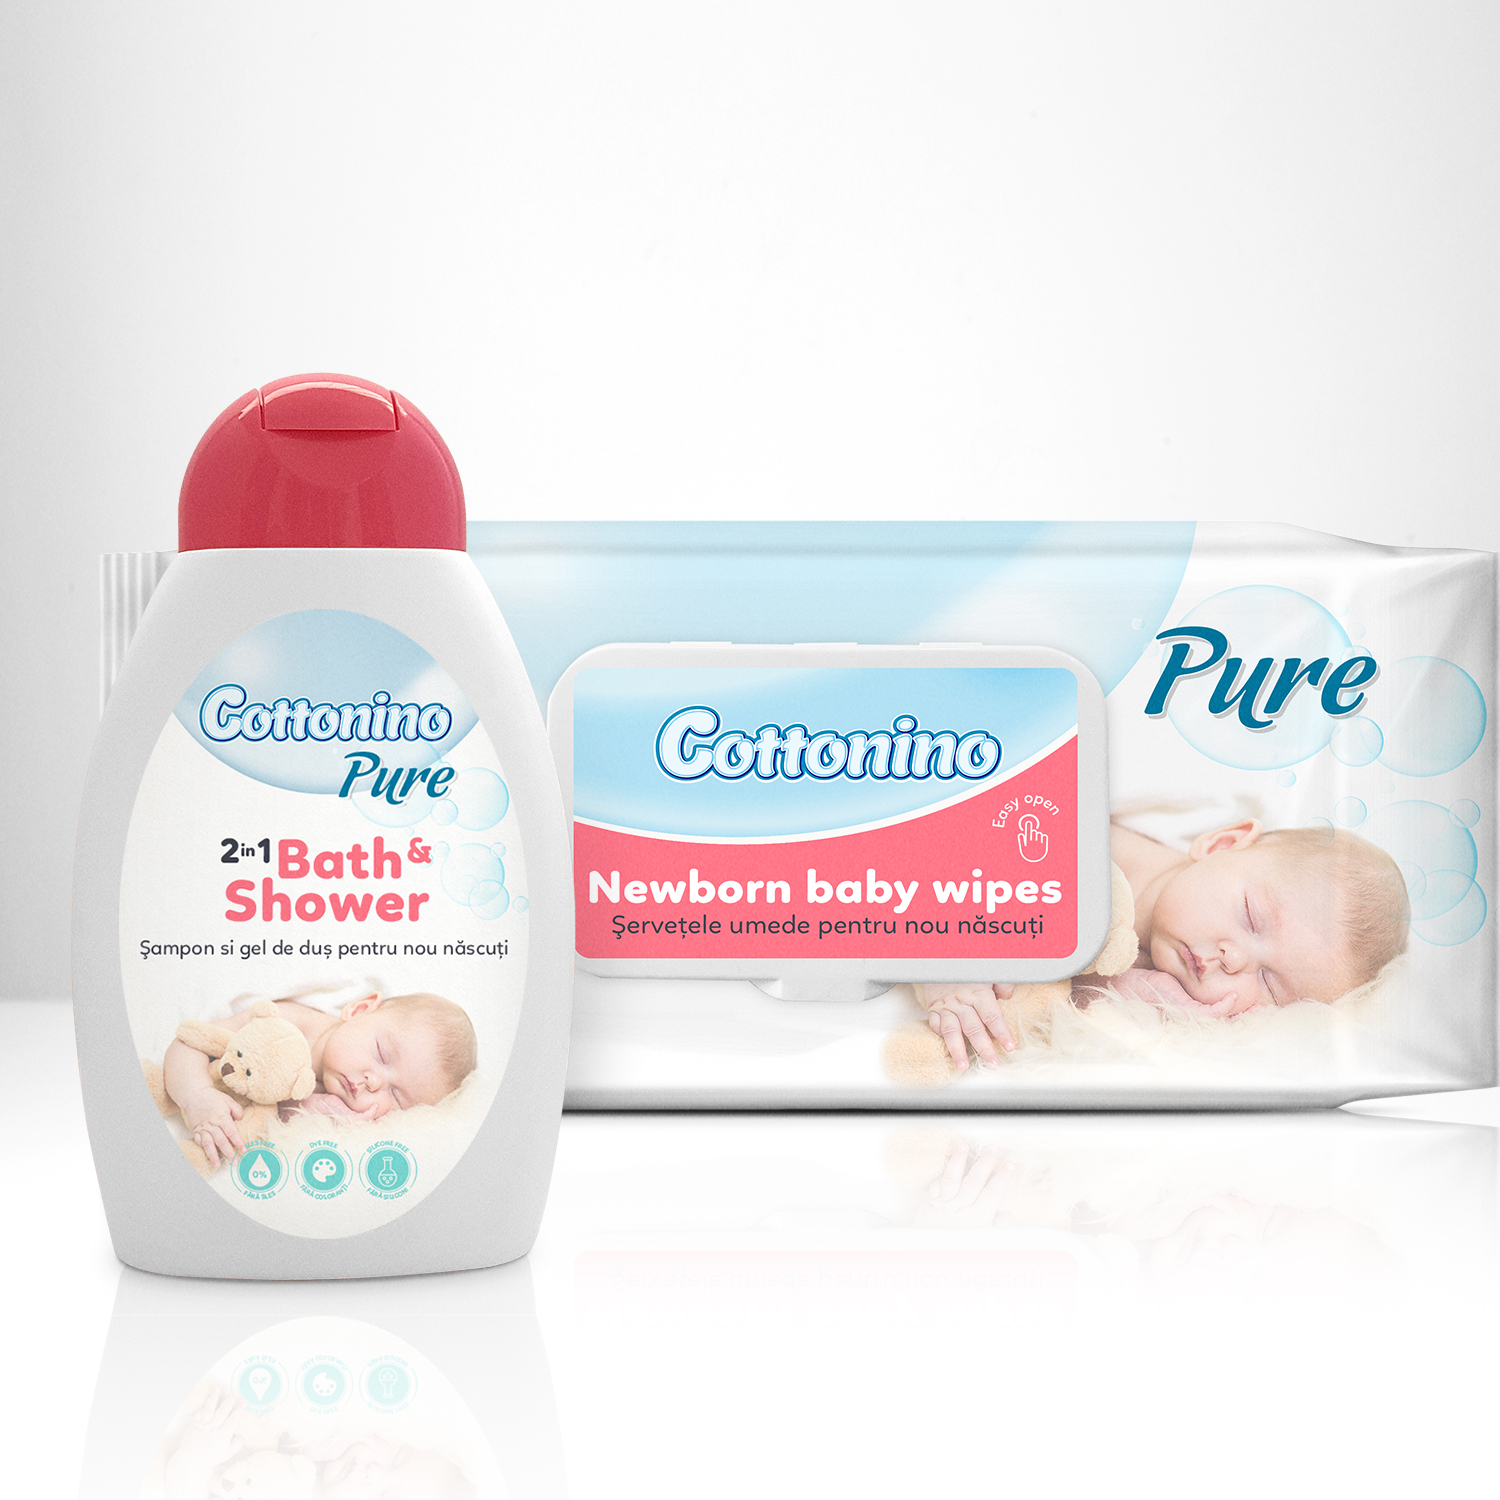 Packaging Design Concept for Cottonino Pure by Sorina Rusu